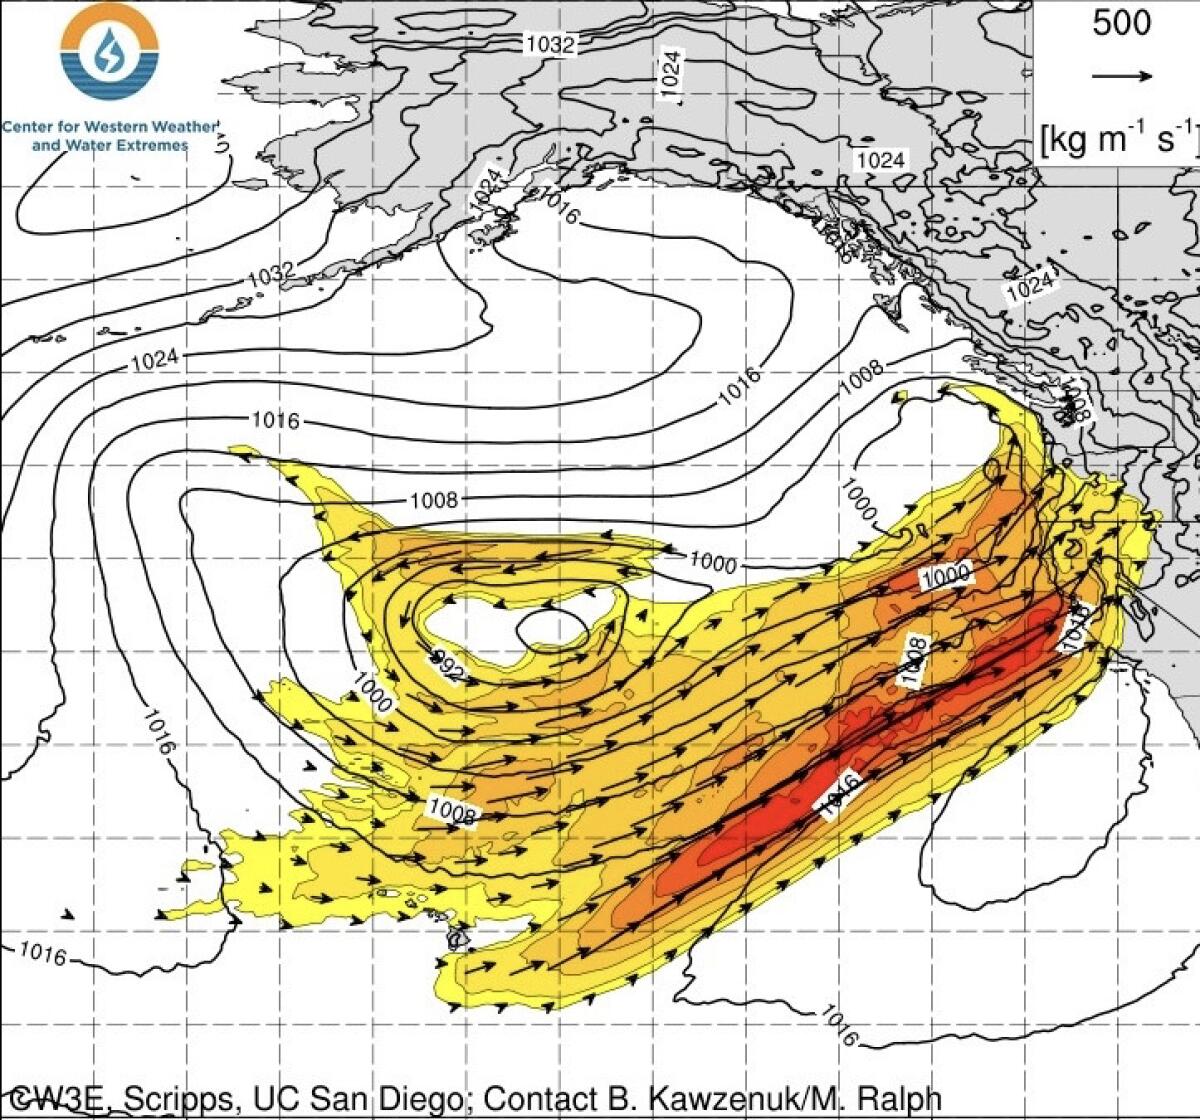 An atmospheric river is expected to flow through Southern and Central California on Friday and Saturday.